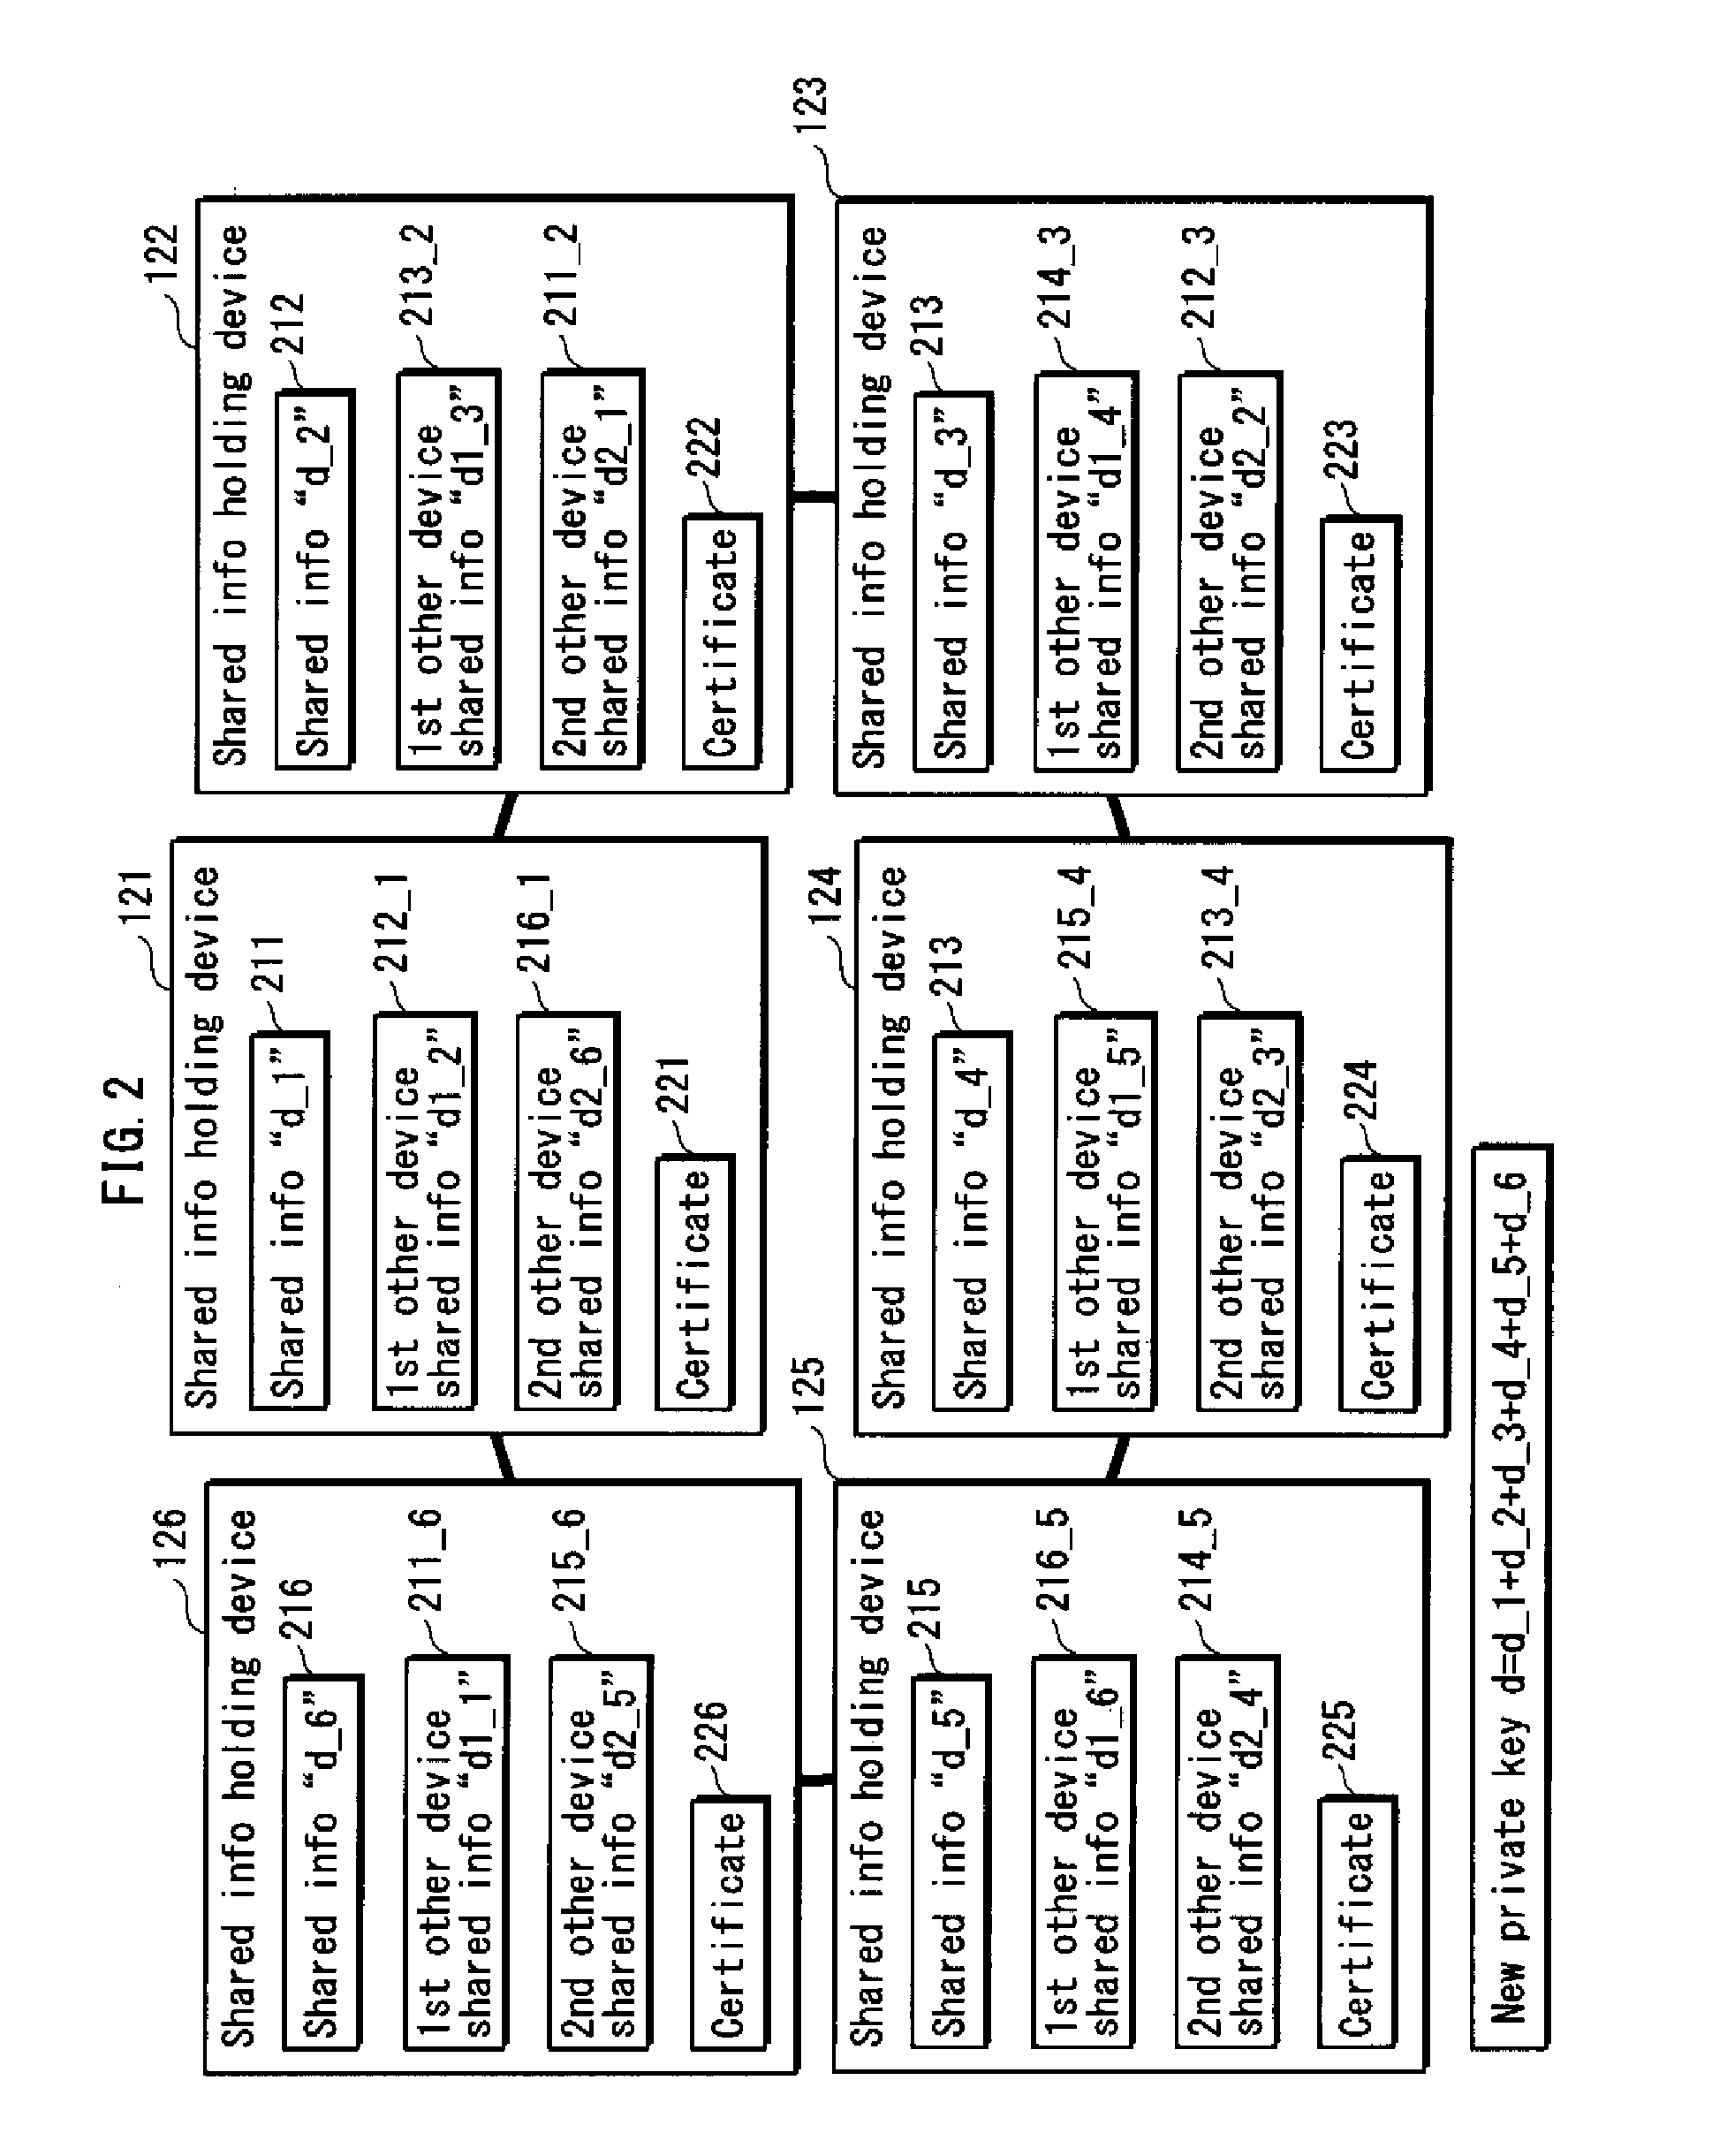 Shared information distributing device, holding device, certificate authority device, and system